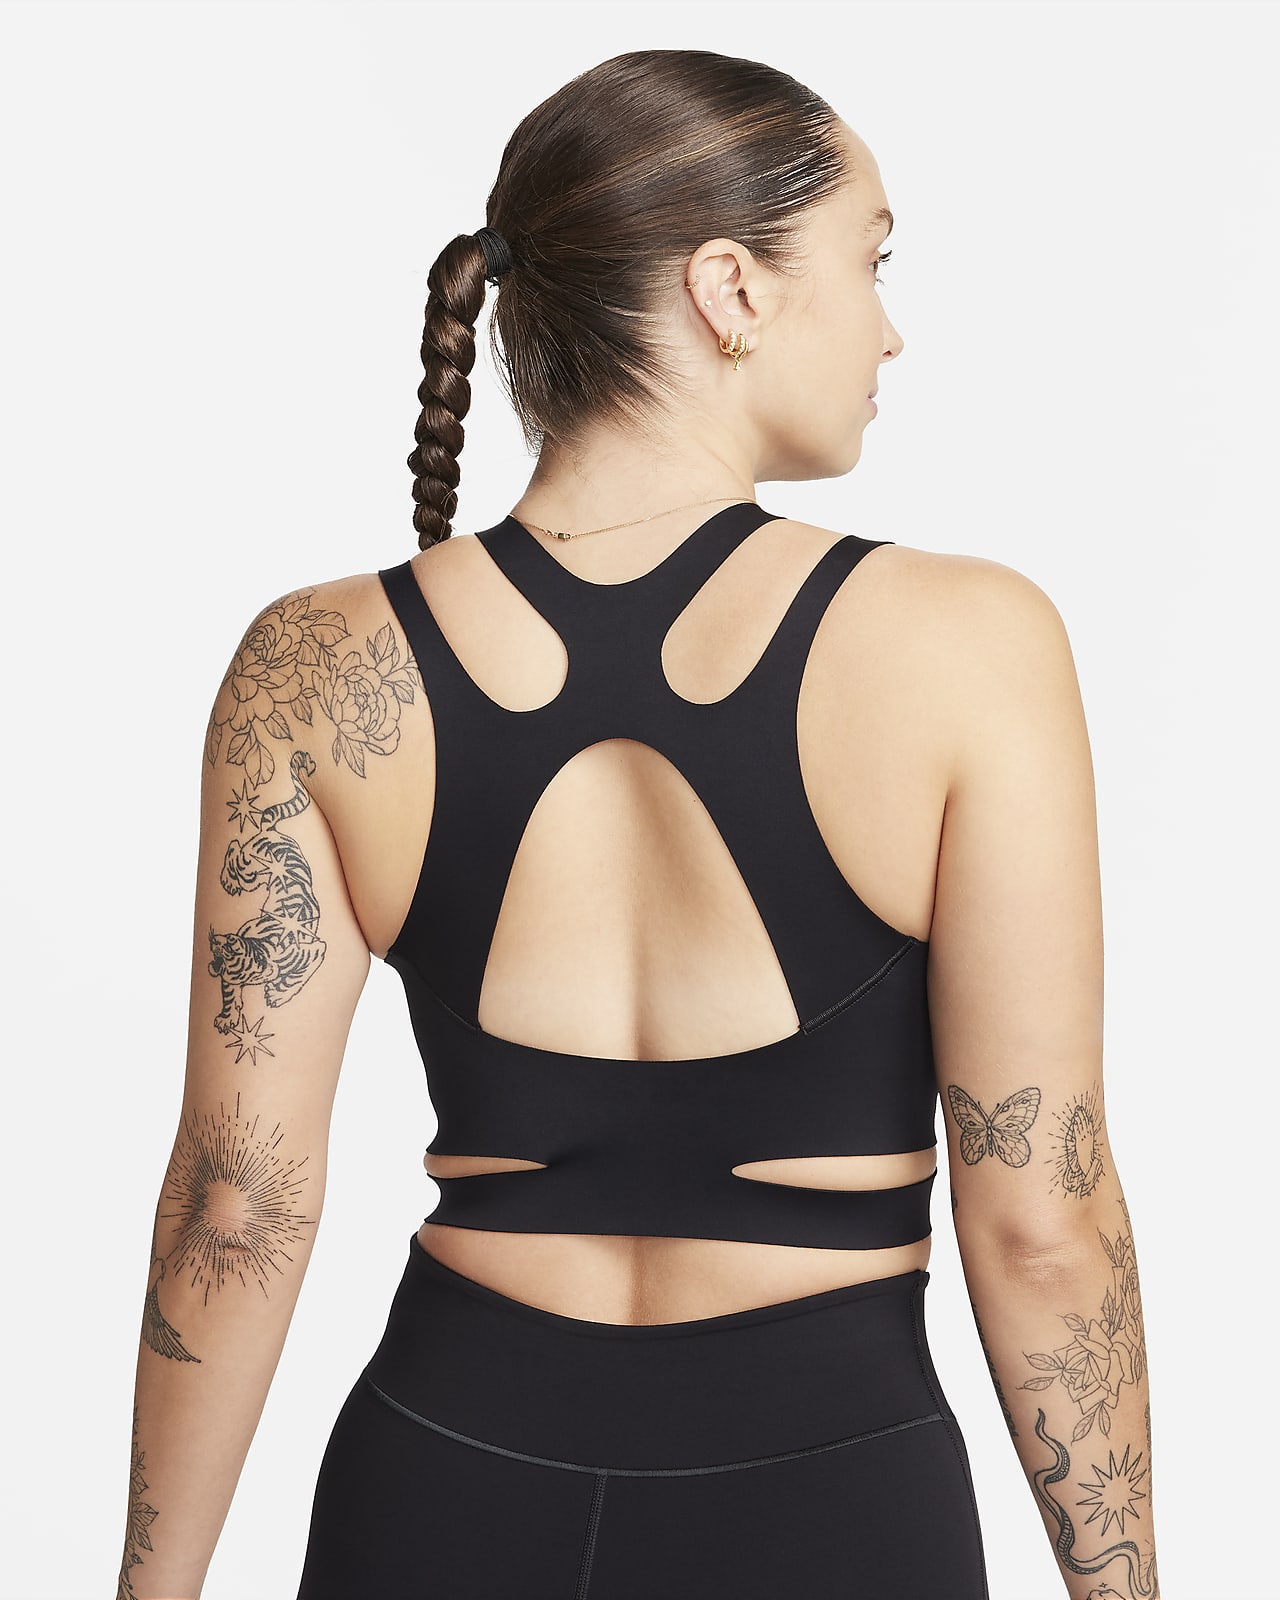 Buy Nike Black Yoga Sports Bra from Next Luxembourg